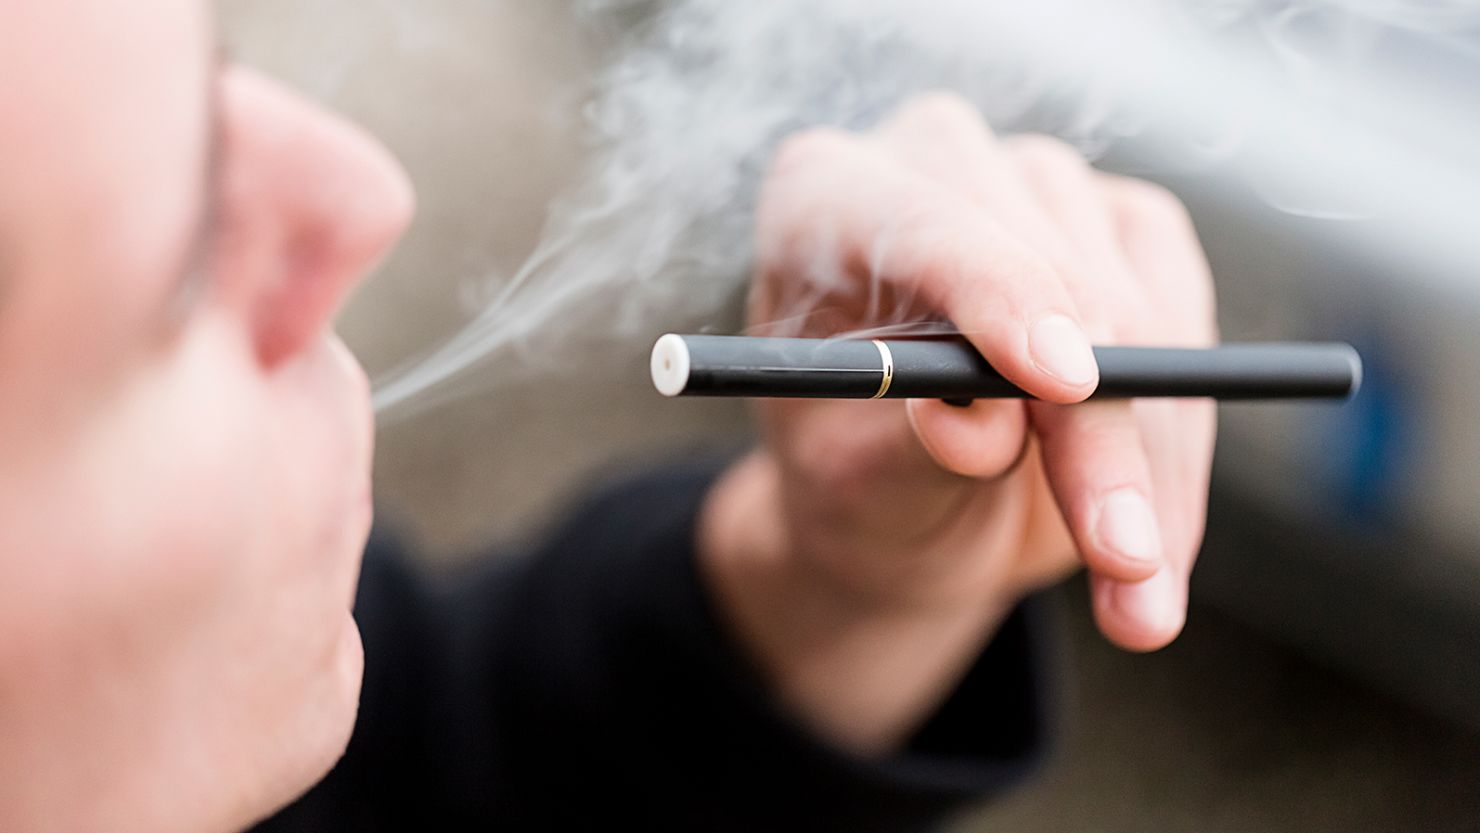 What Are Electronic Cigarettes?